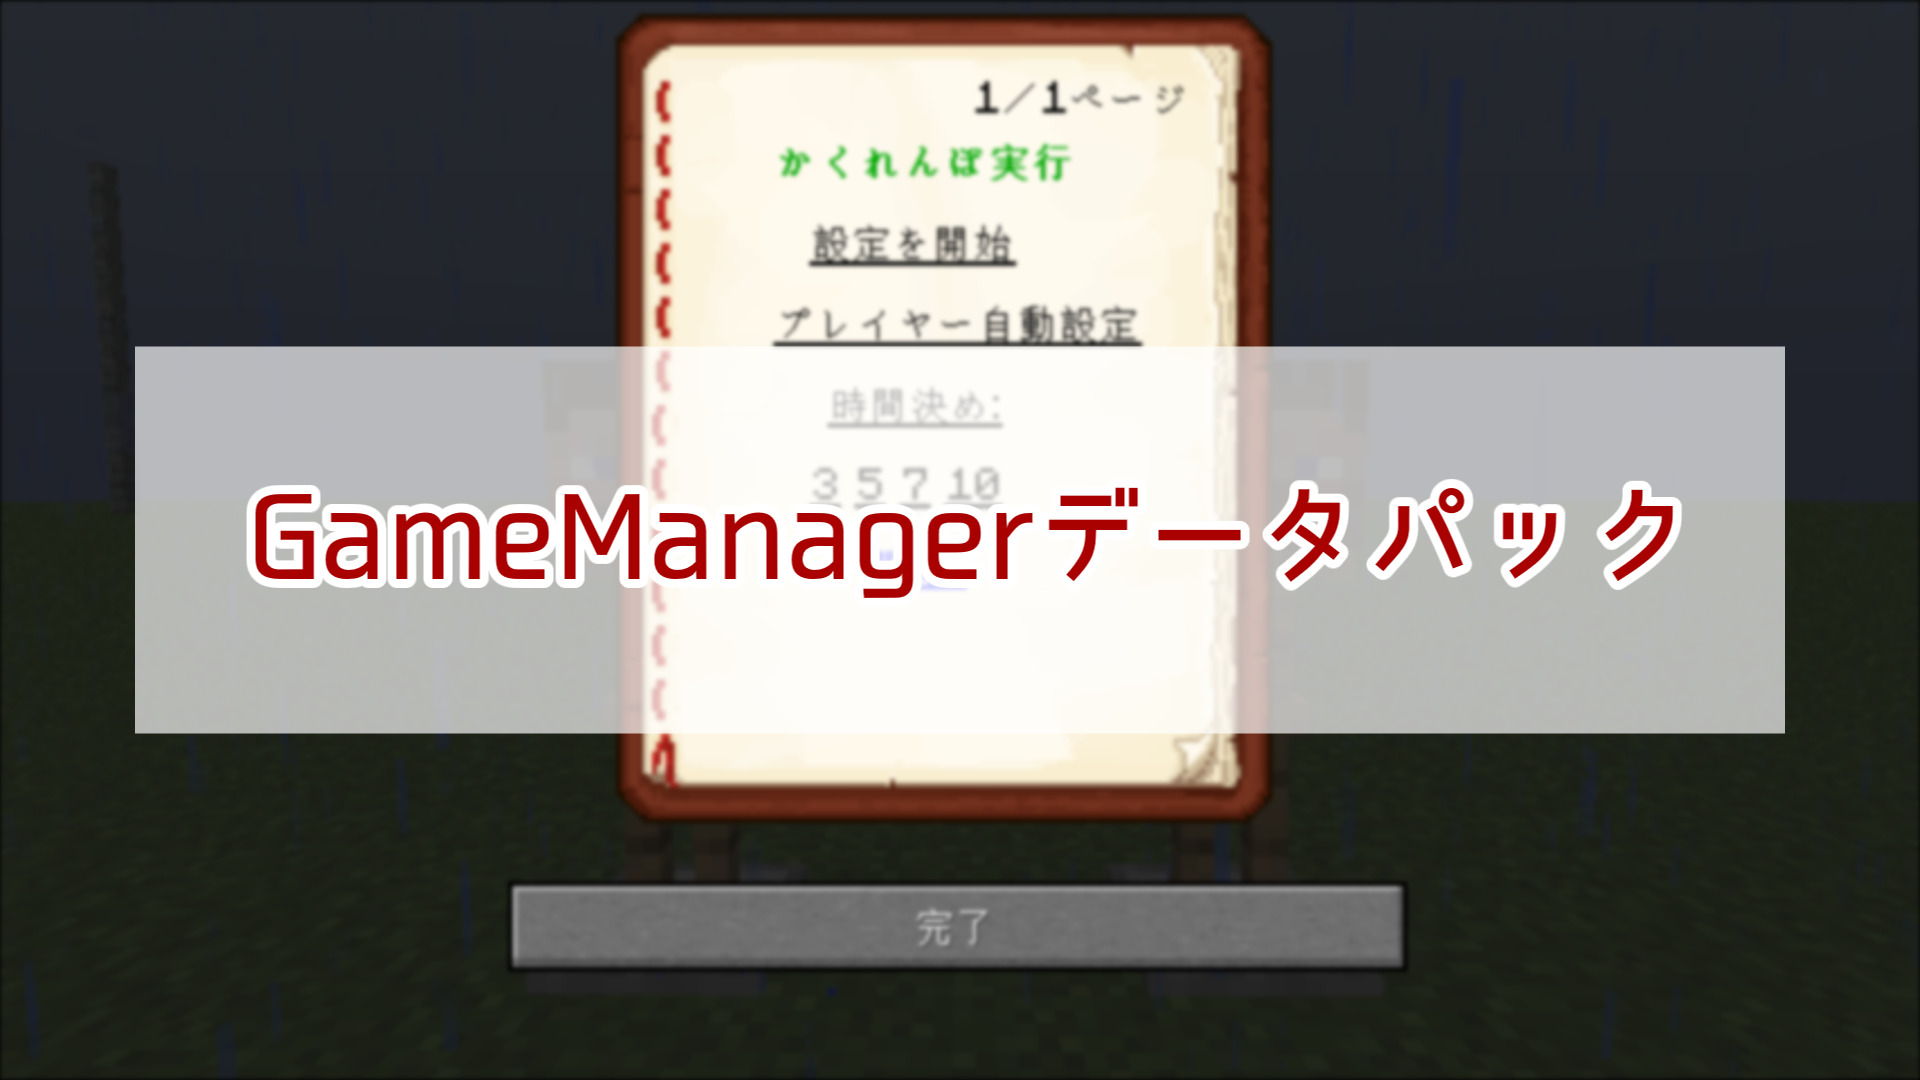 Gamemanager-a43c5f66